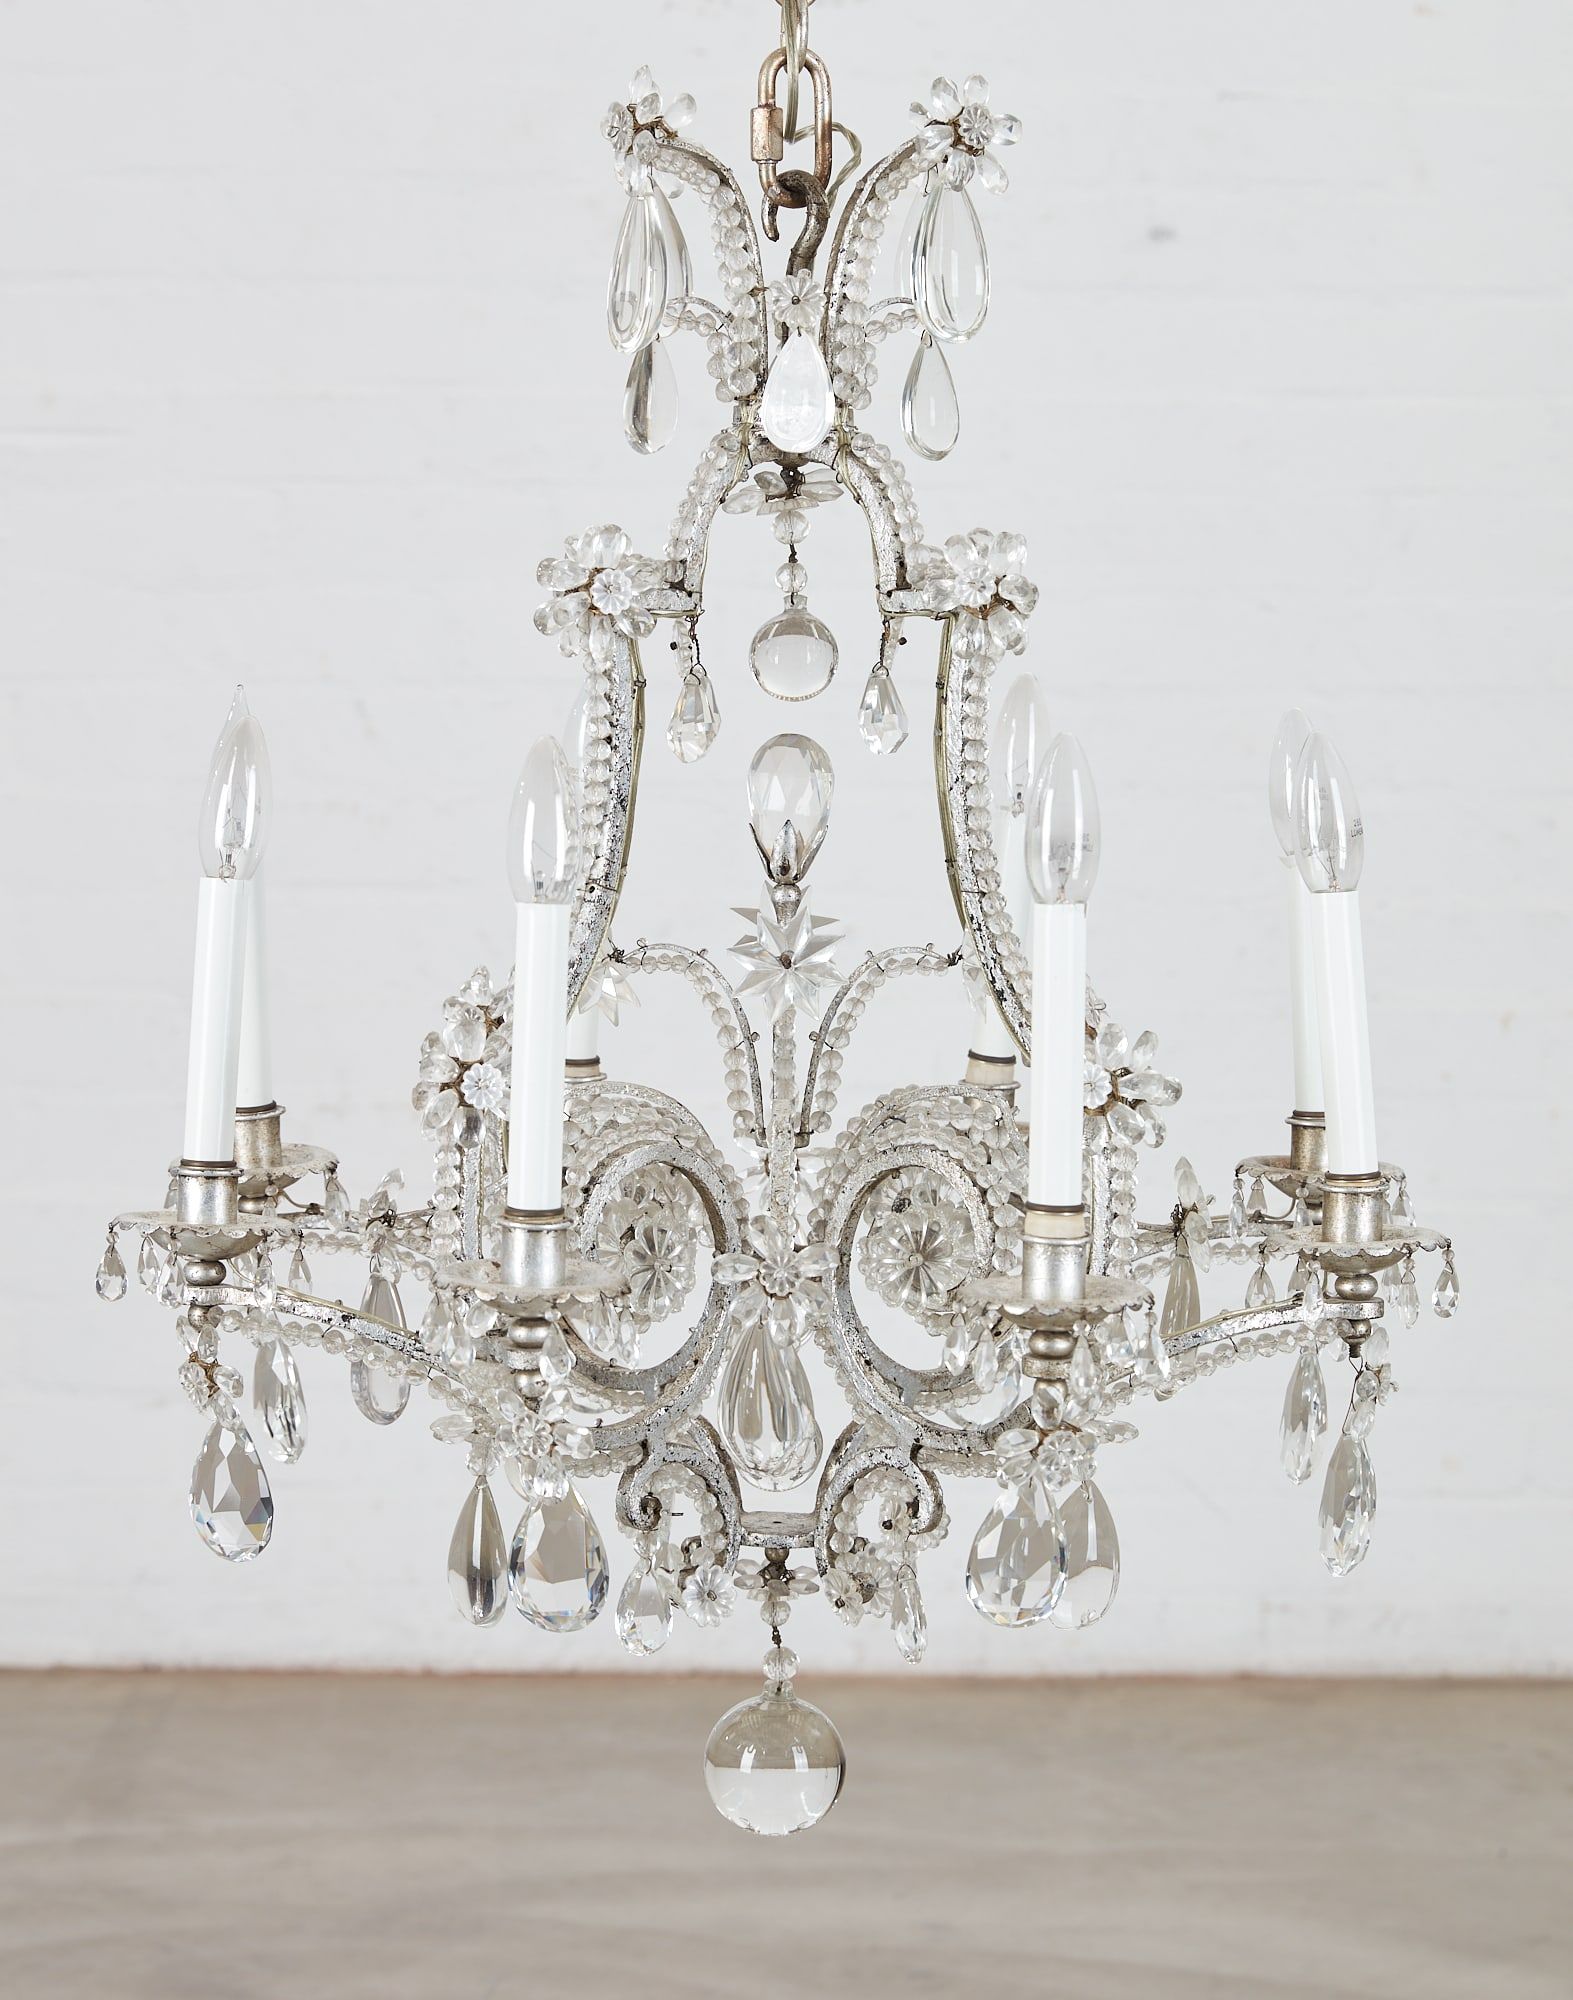 A ROCOCO STYLE GLASS EIGHT LIGHT